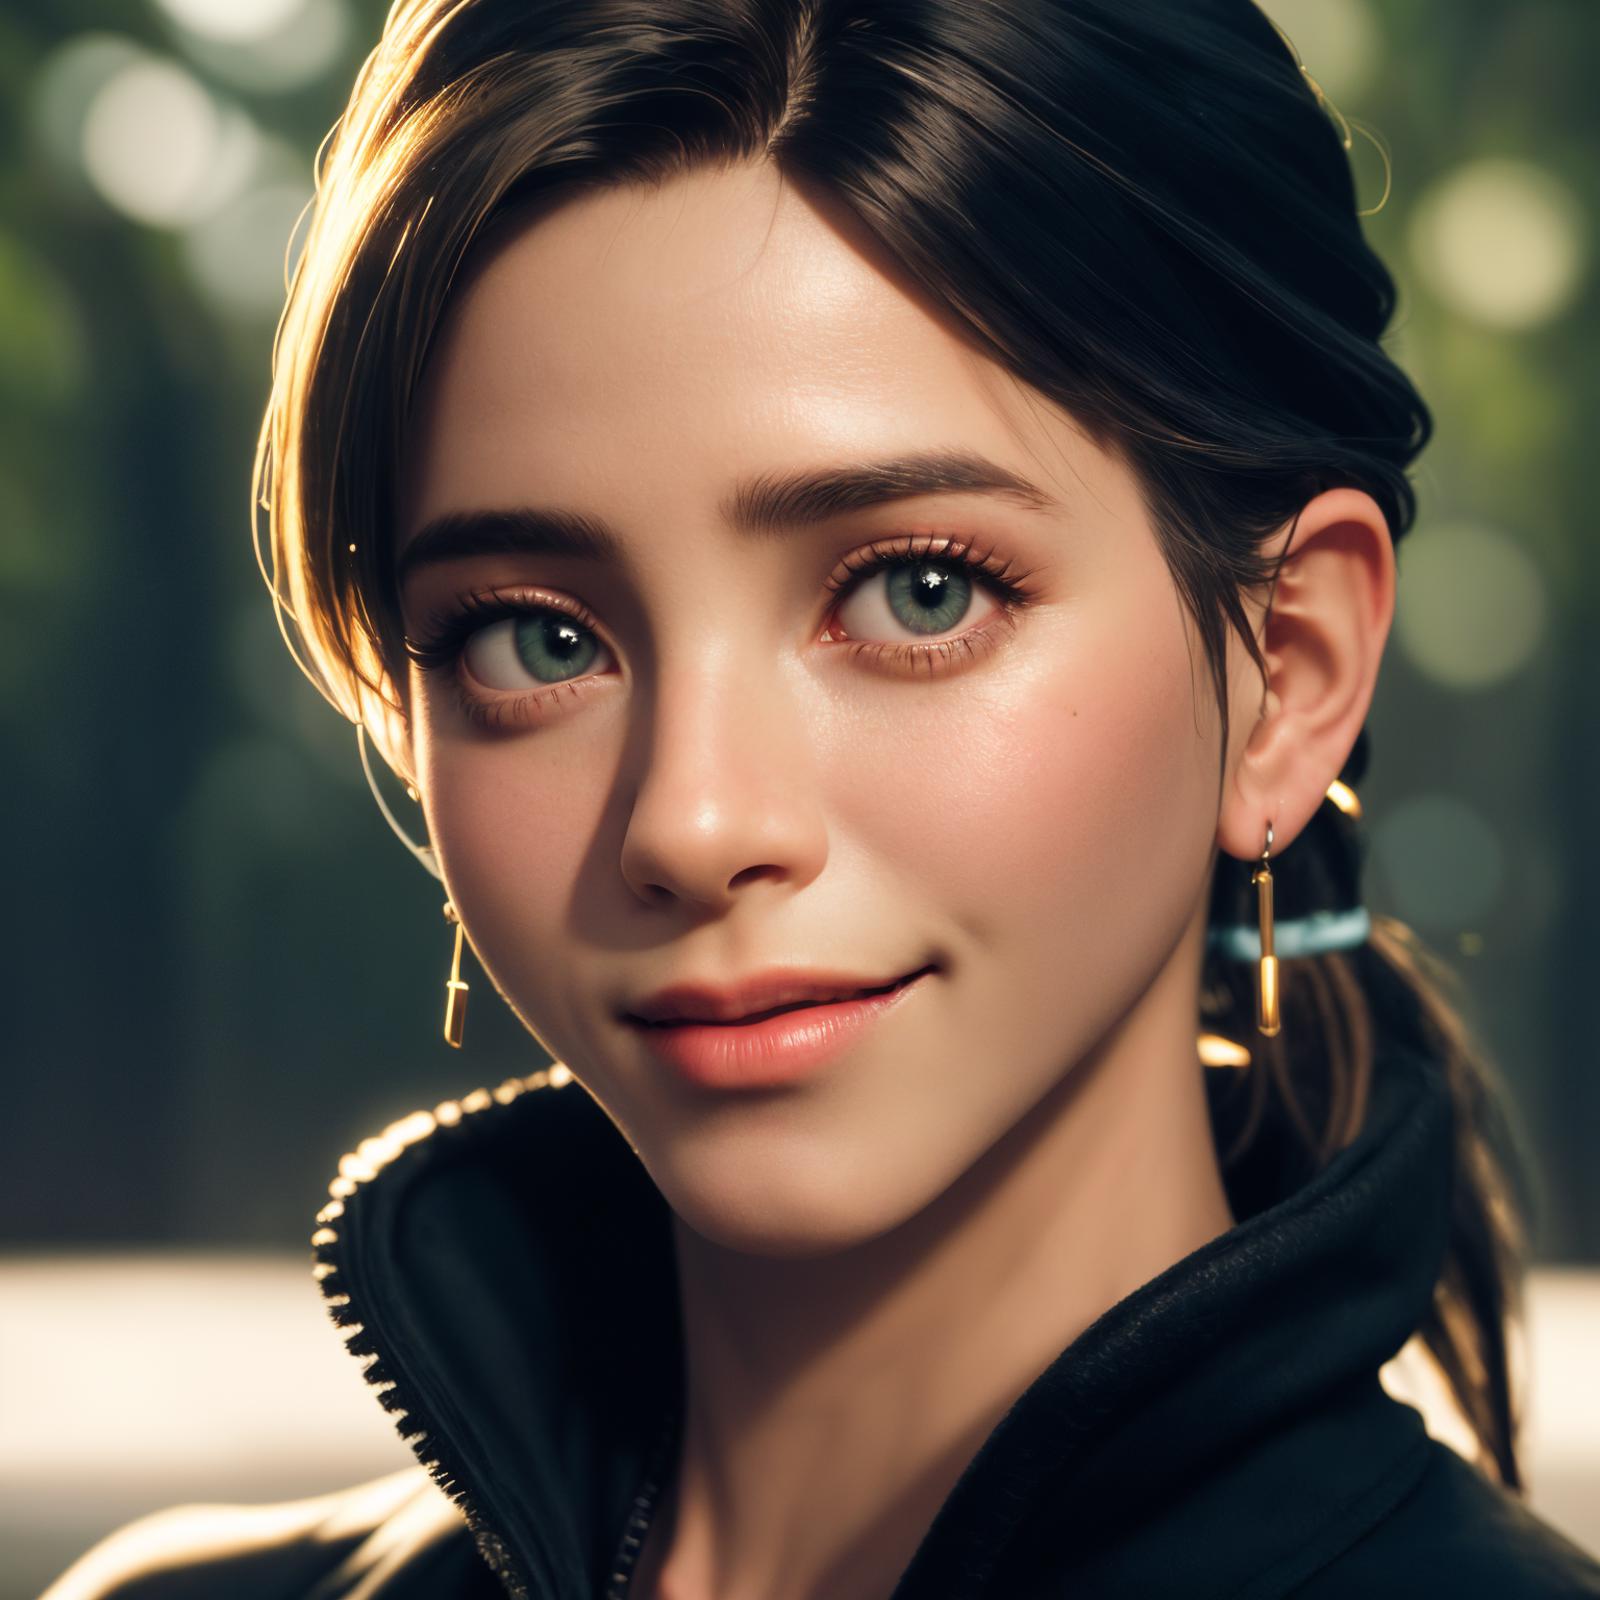 A 3D rendered woman with long brown hair wearing a black sweater and earrings.